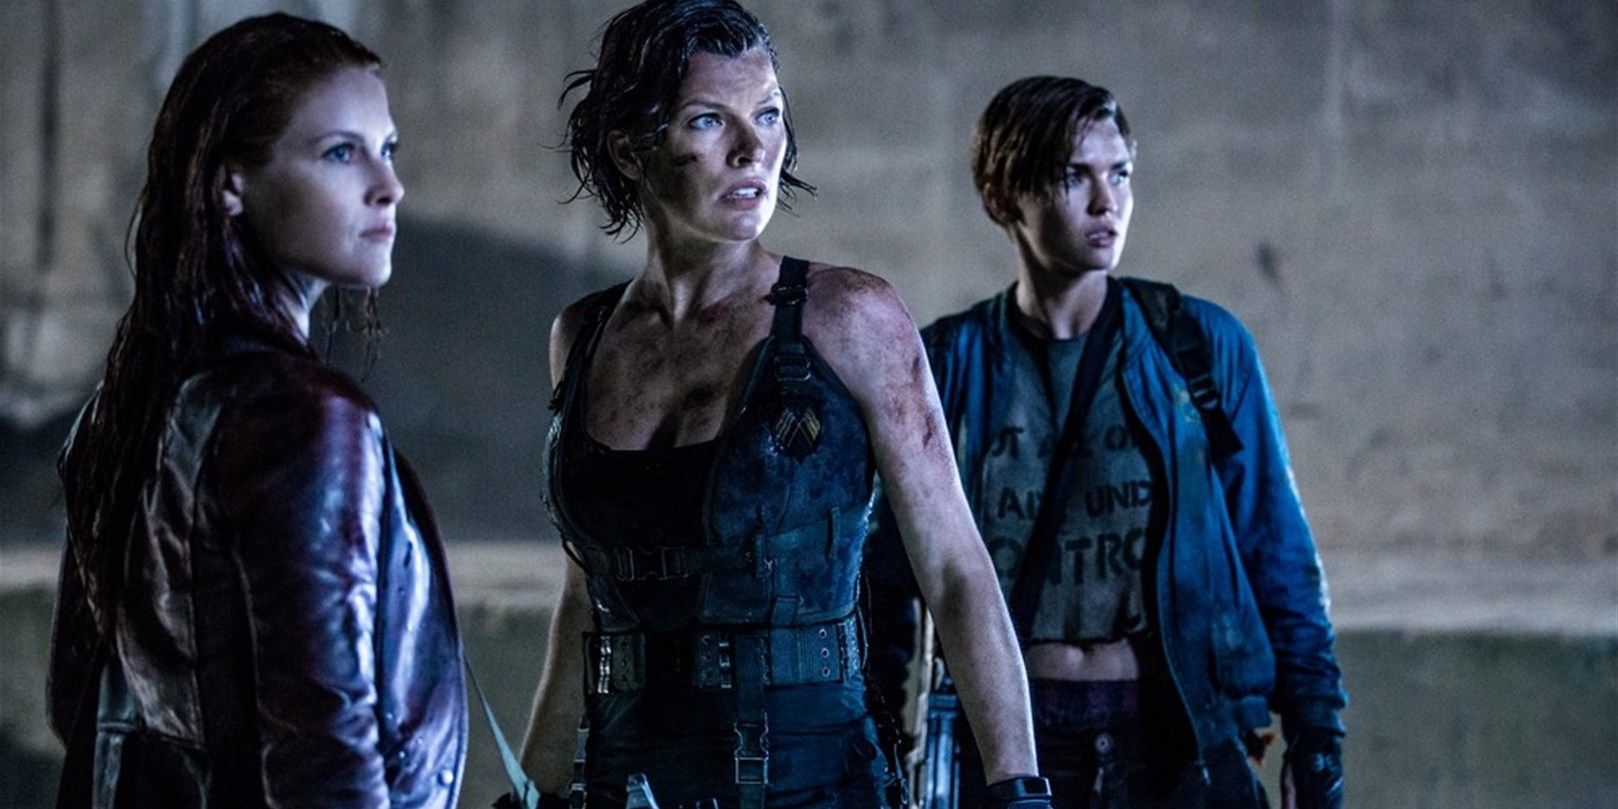 Ali Larter, Milla Jovovich and Ruby Rose in Resident Evil: The Final Chapter